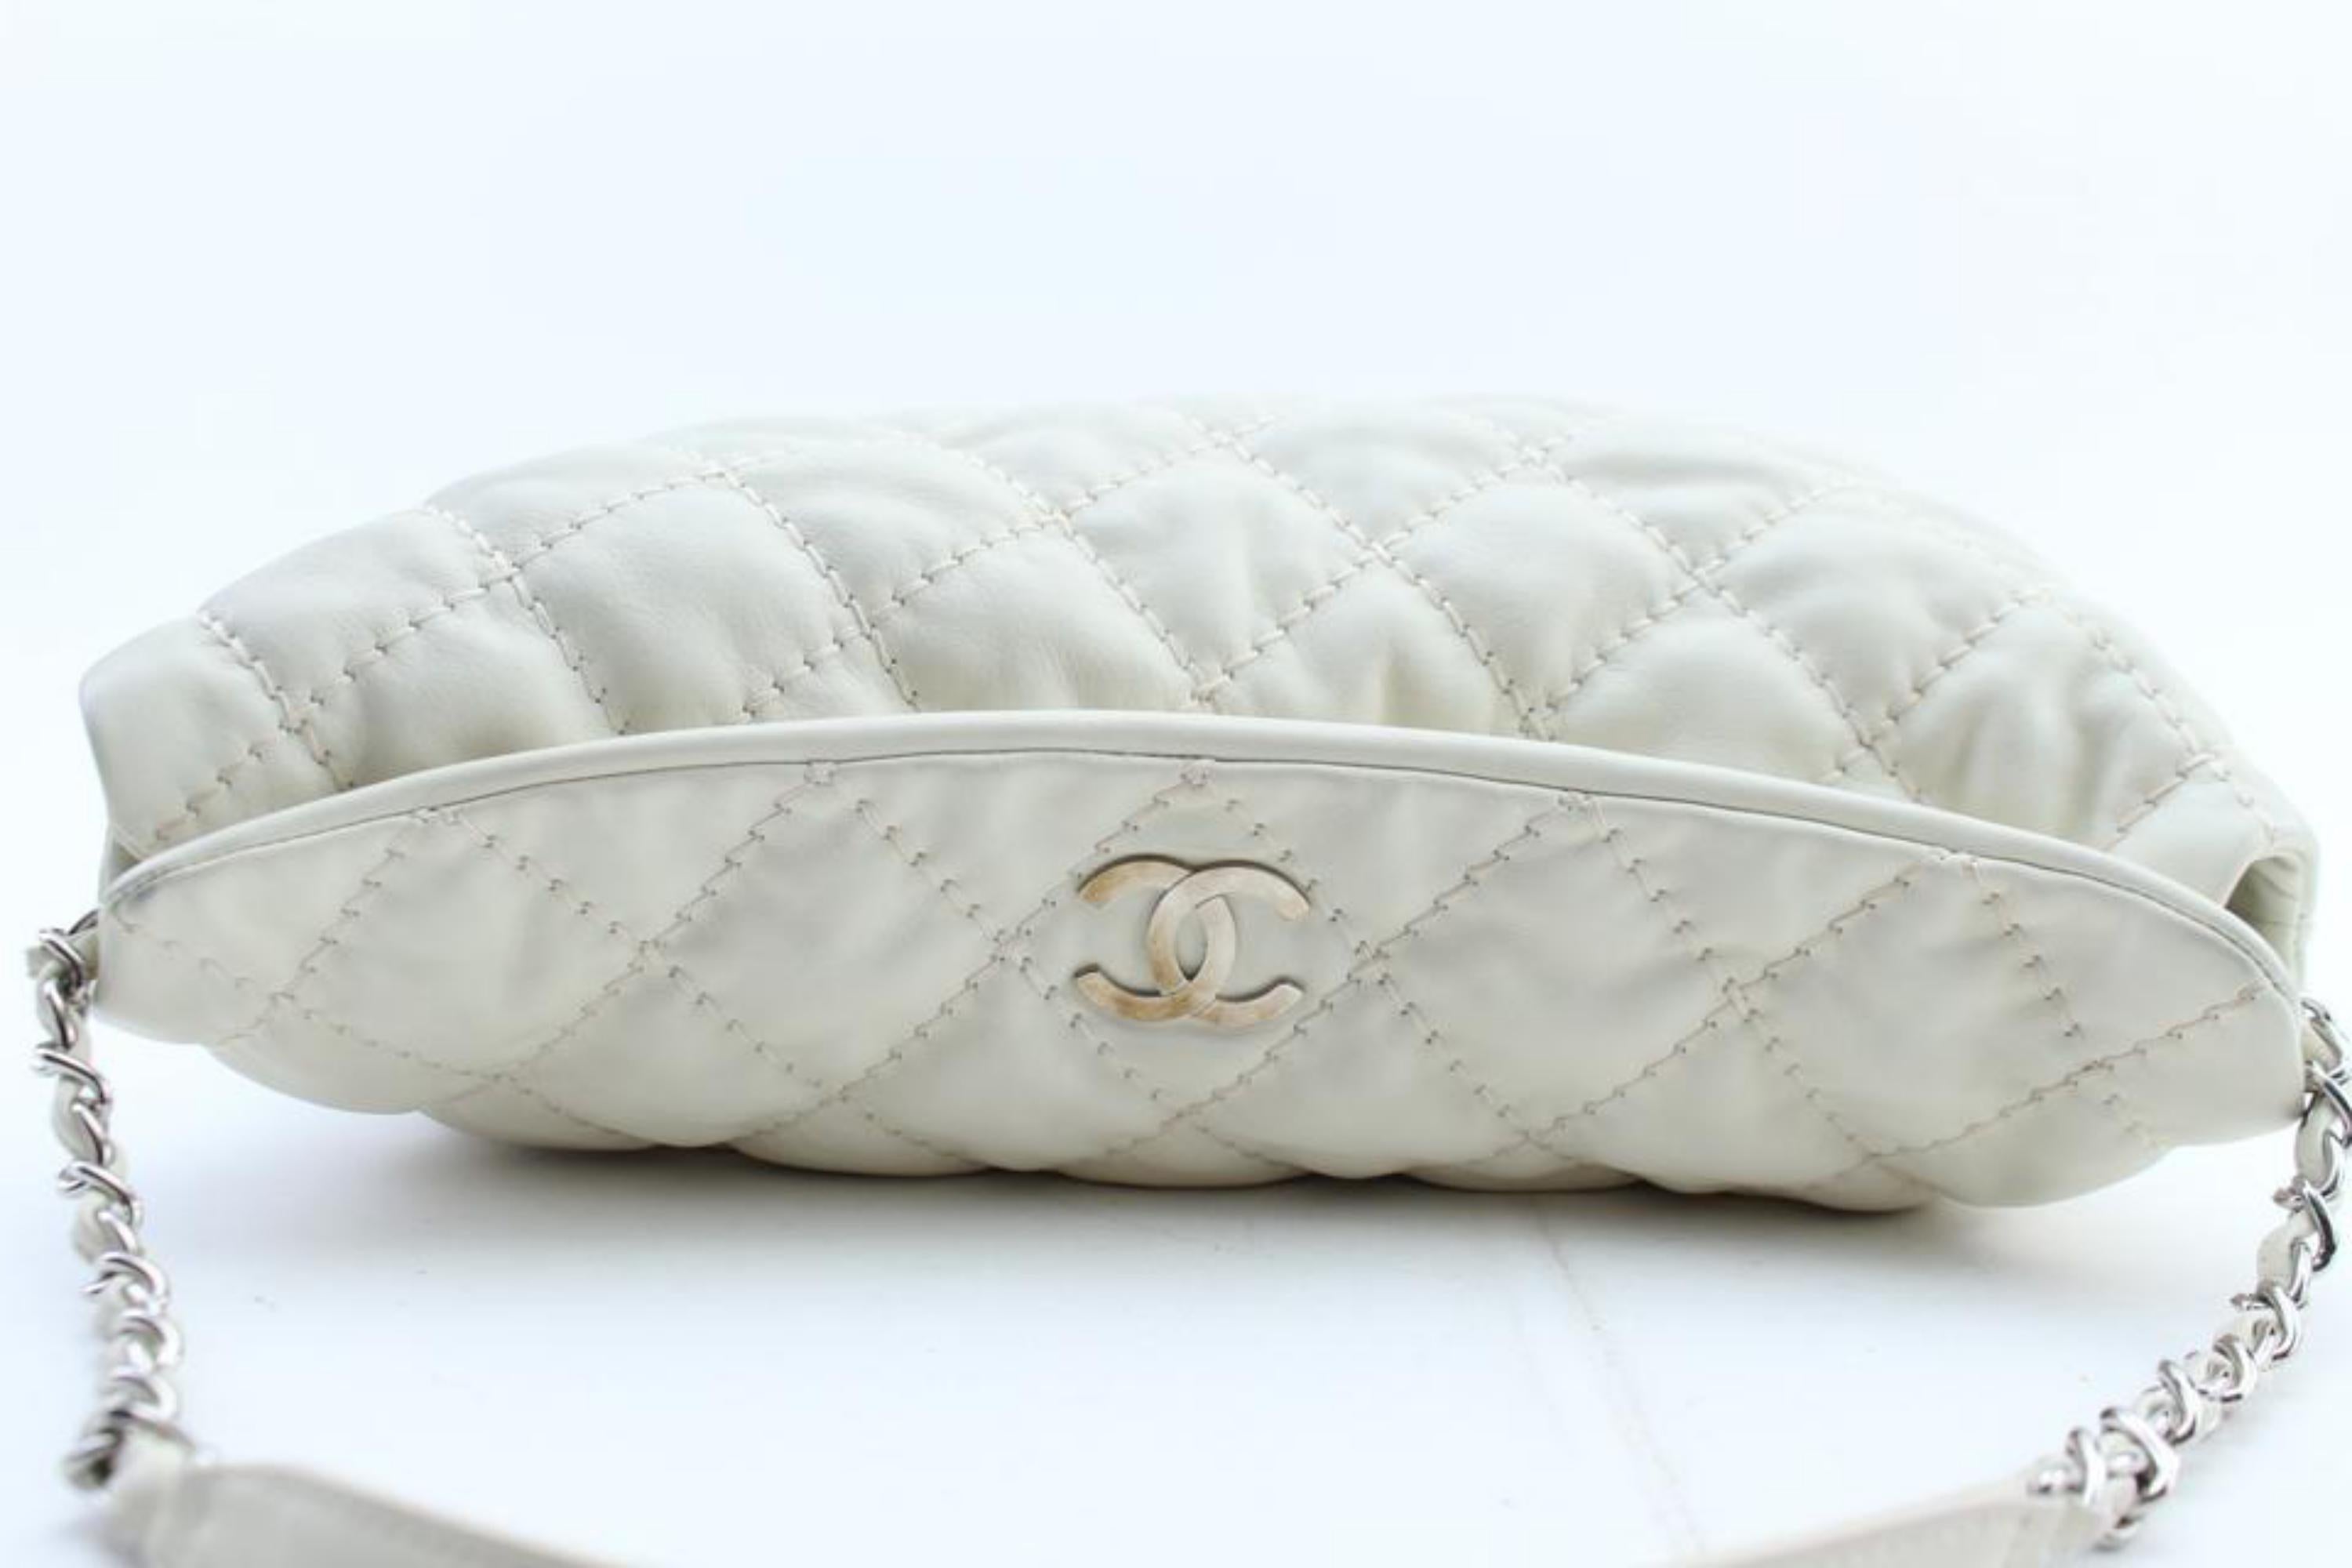 Chanel Hobo French Riviera 13cr0228 Ivory Quilted Leather Shoulder Bag For Sale 3